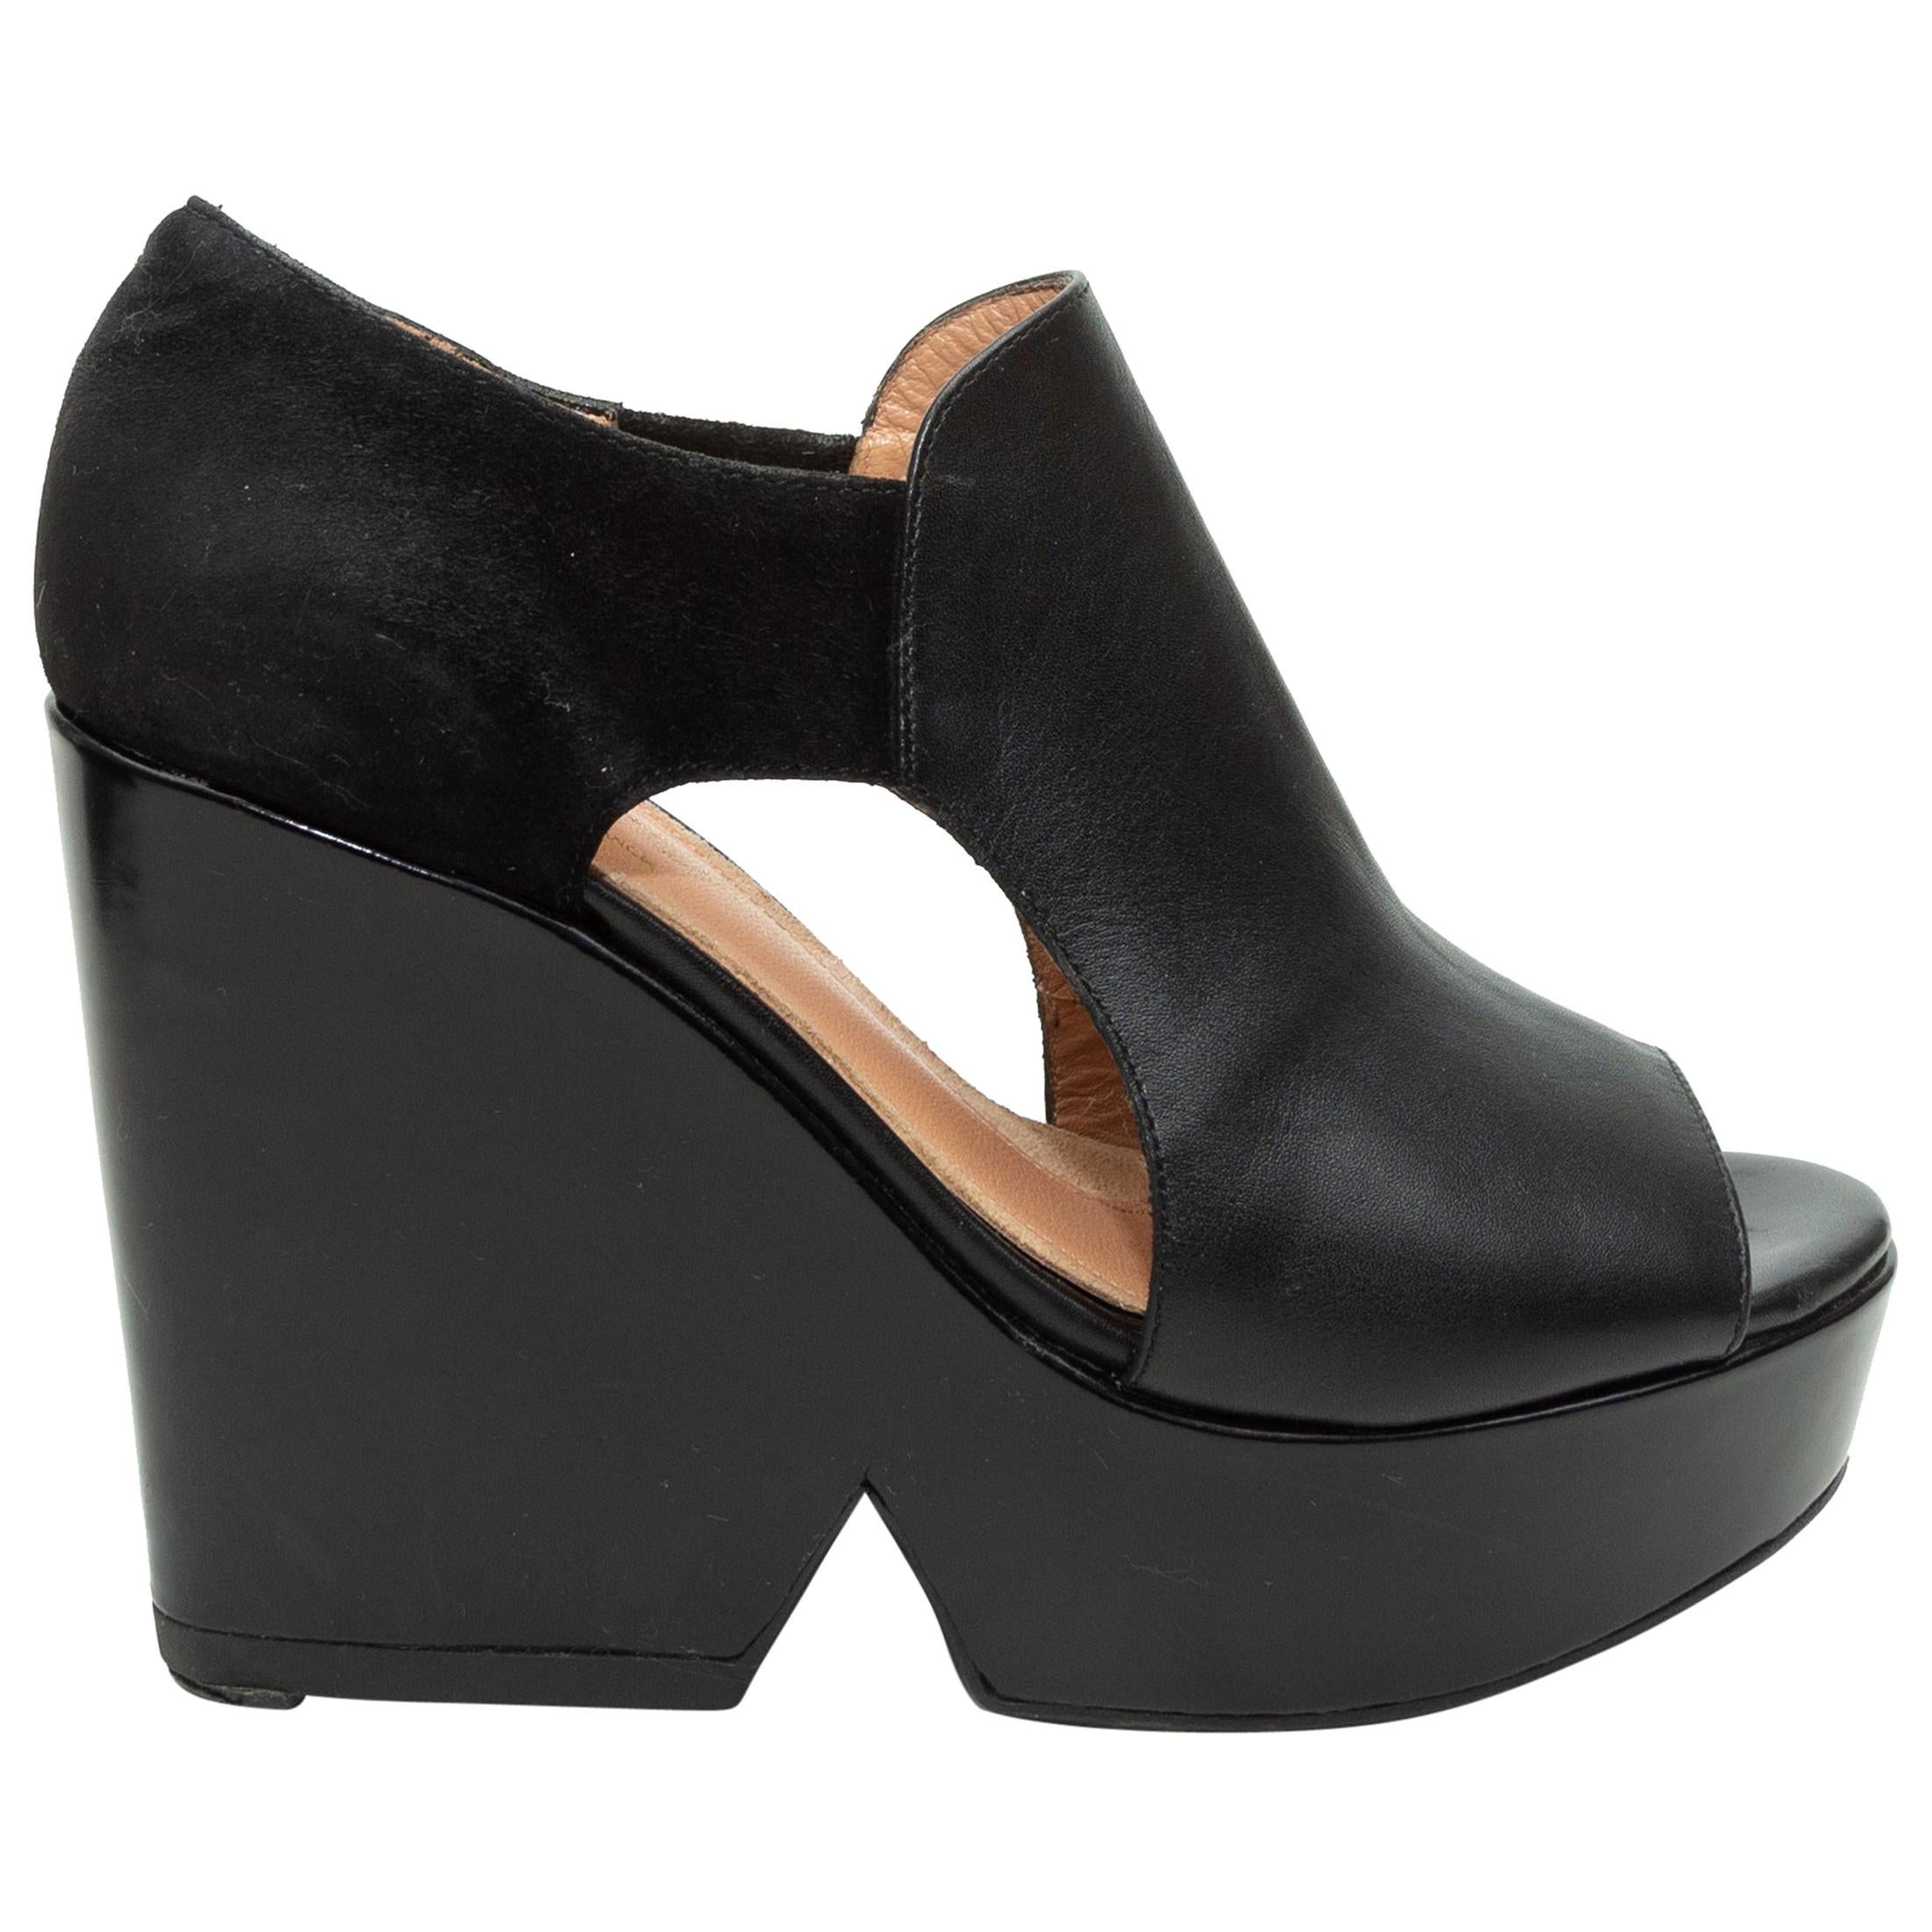 Robert Clergerie Black Suede & Leather Wedges